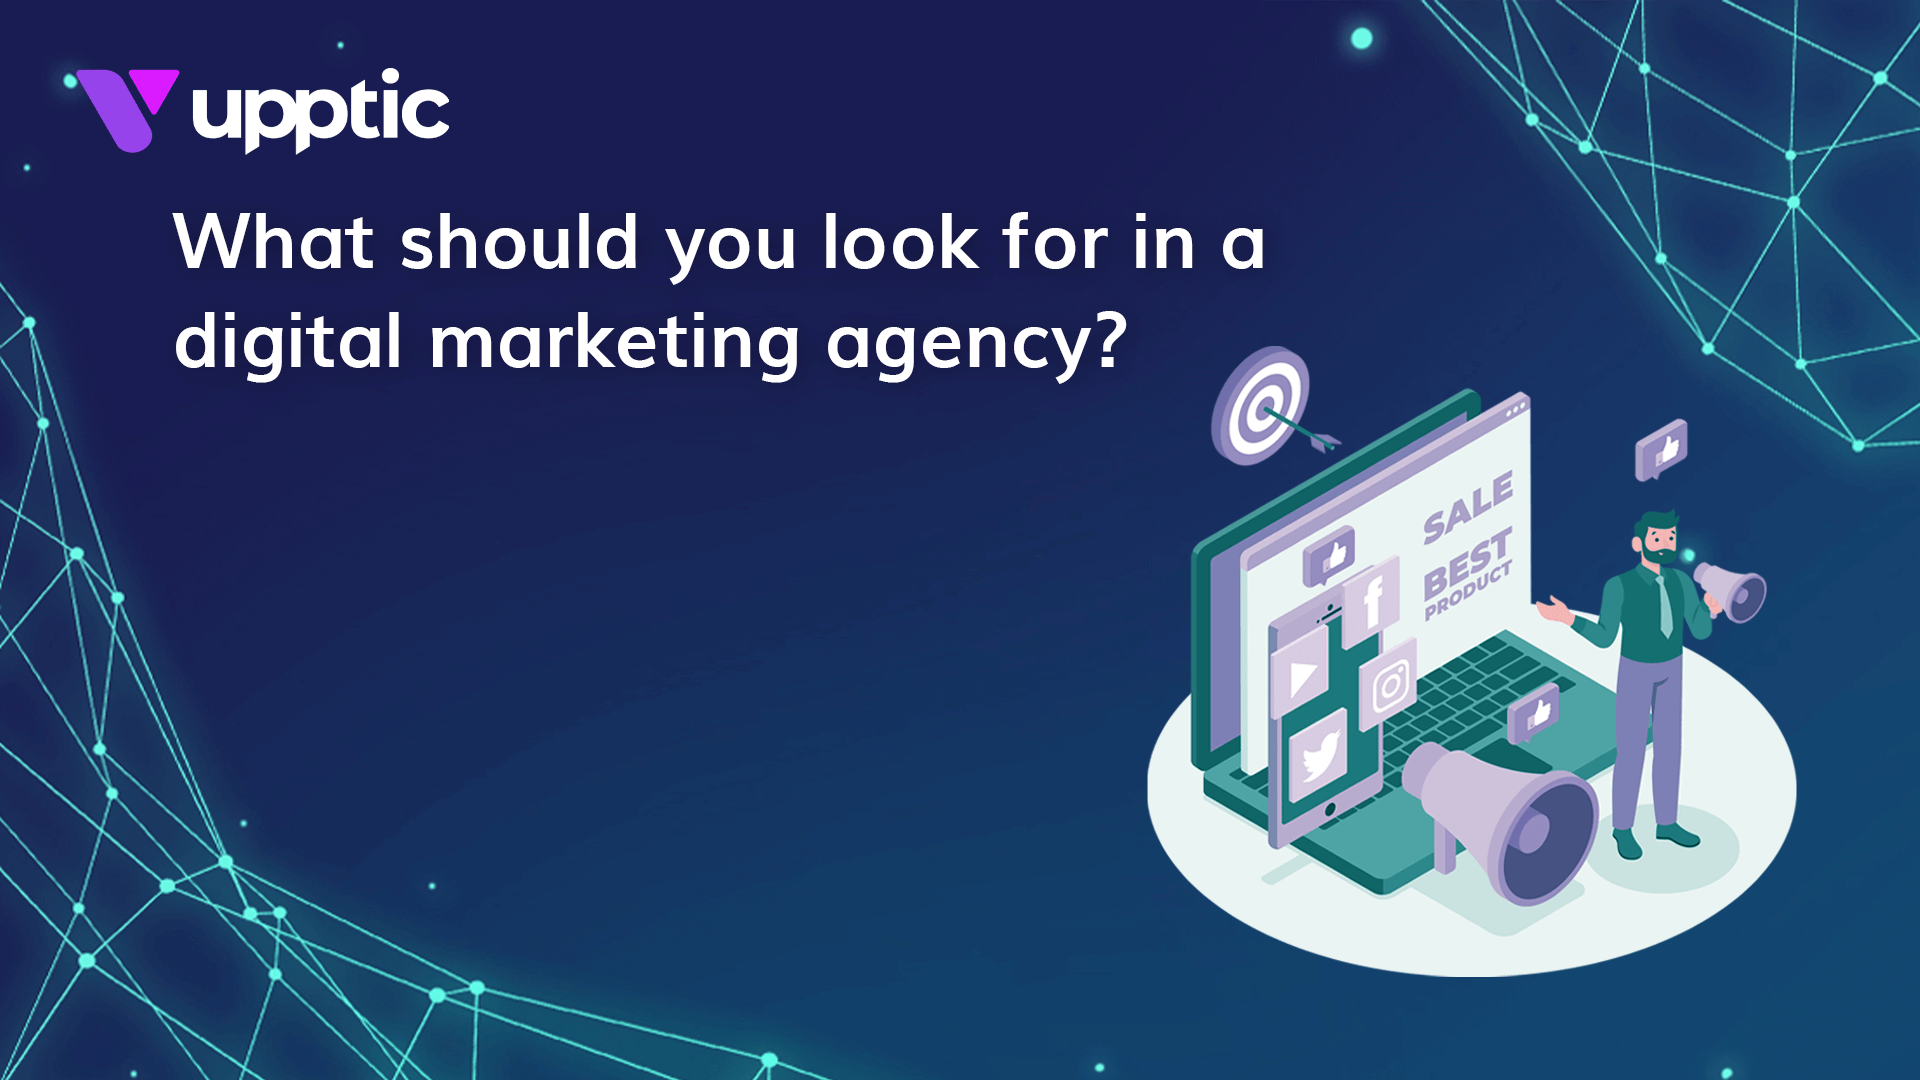 What should you look for in a digital marketing agency?